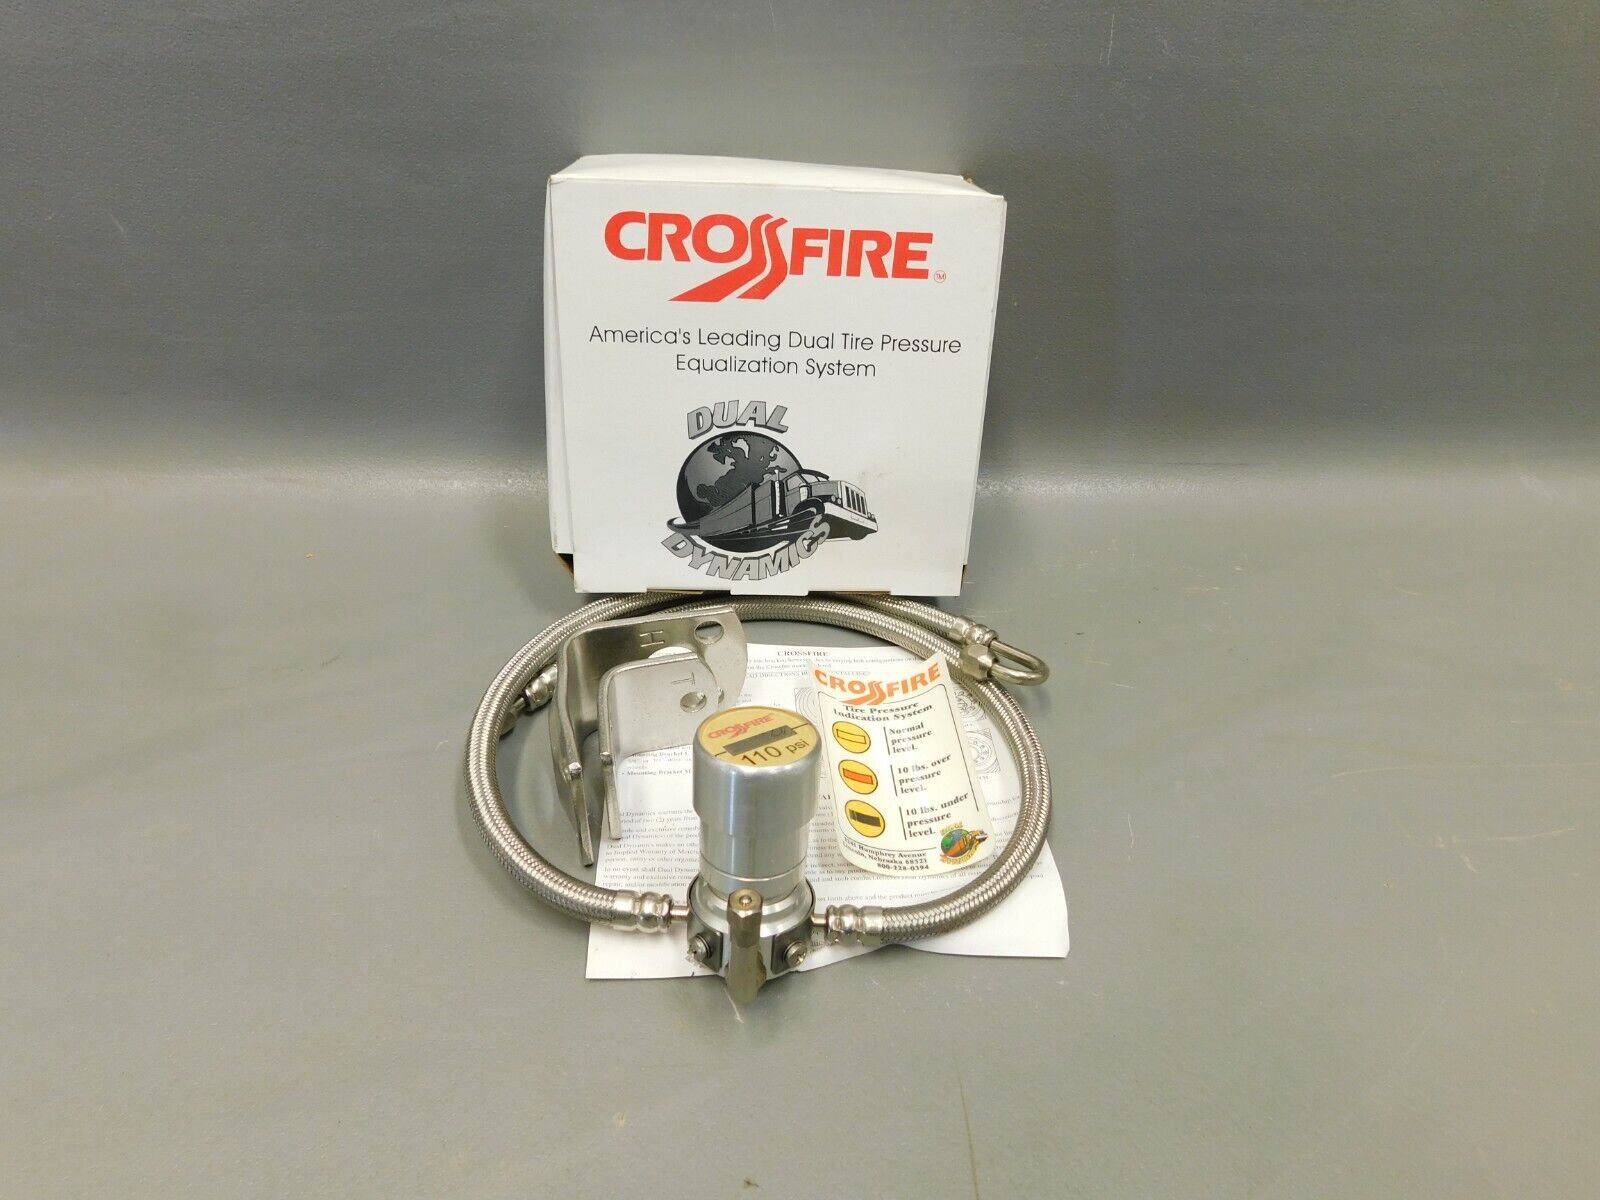 Crossfire Dual Dynamics 110psi Dual Tire Pressure Equalization System